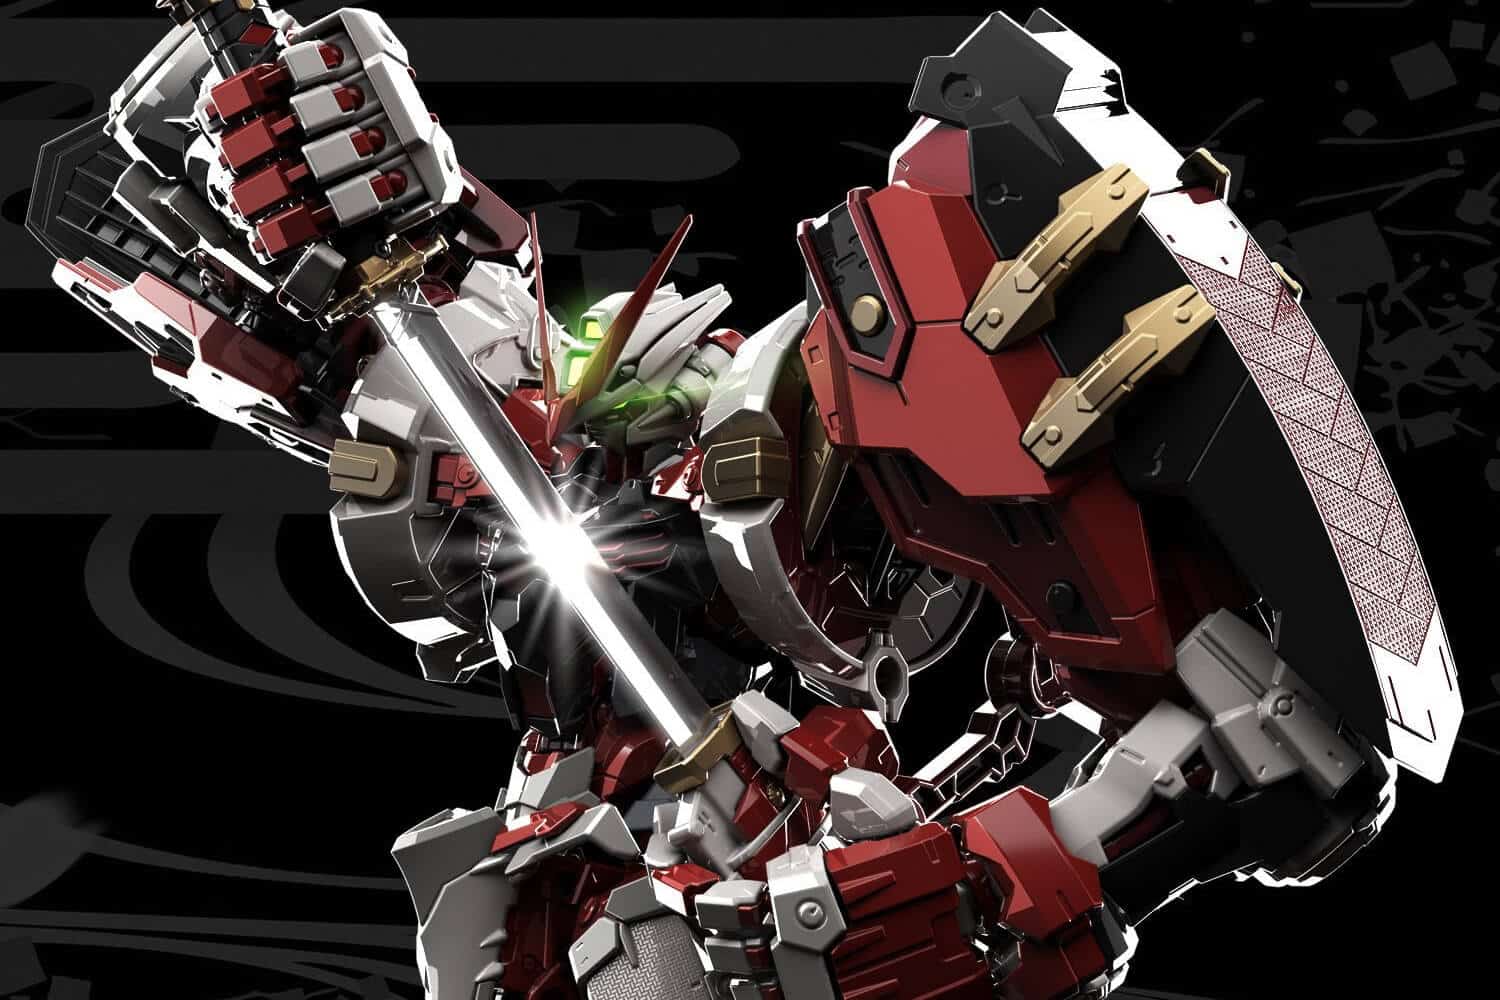 All of the New Gundam Model Kits Releasing in 2022